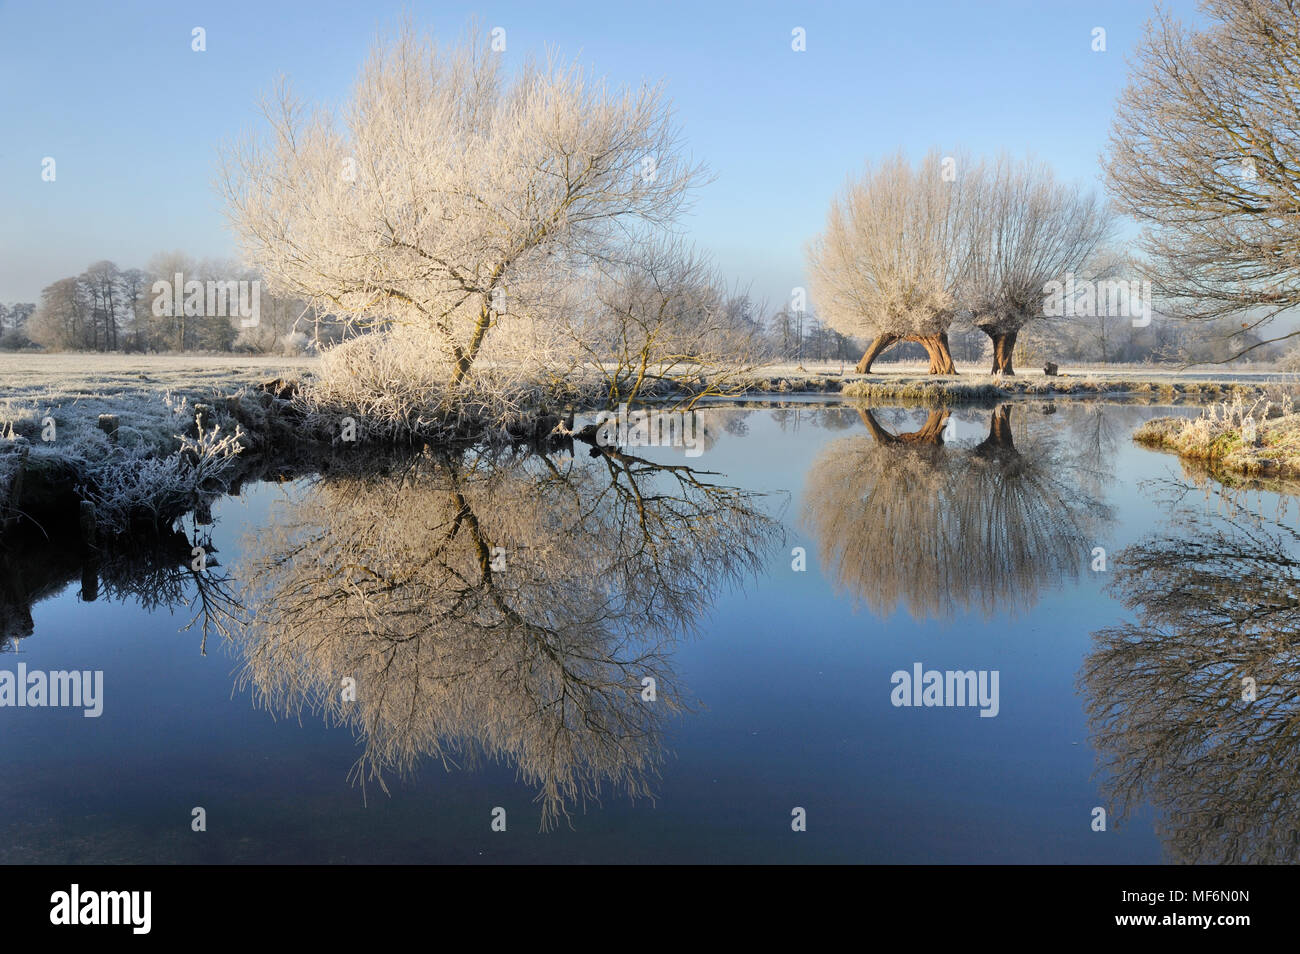 Willow trees in hoar frost and reflections in the river Stour, Stour valley, Constable Country, Dedham Vale, Flatford, Dedham, Essex /Suffolk Borders Stock Photo